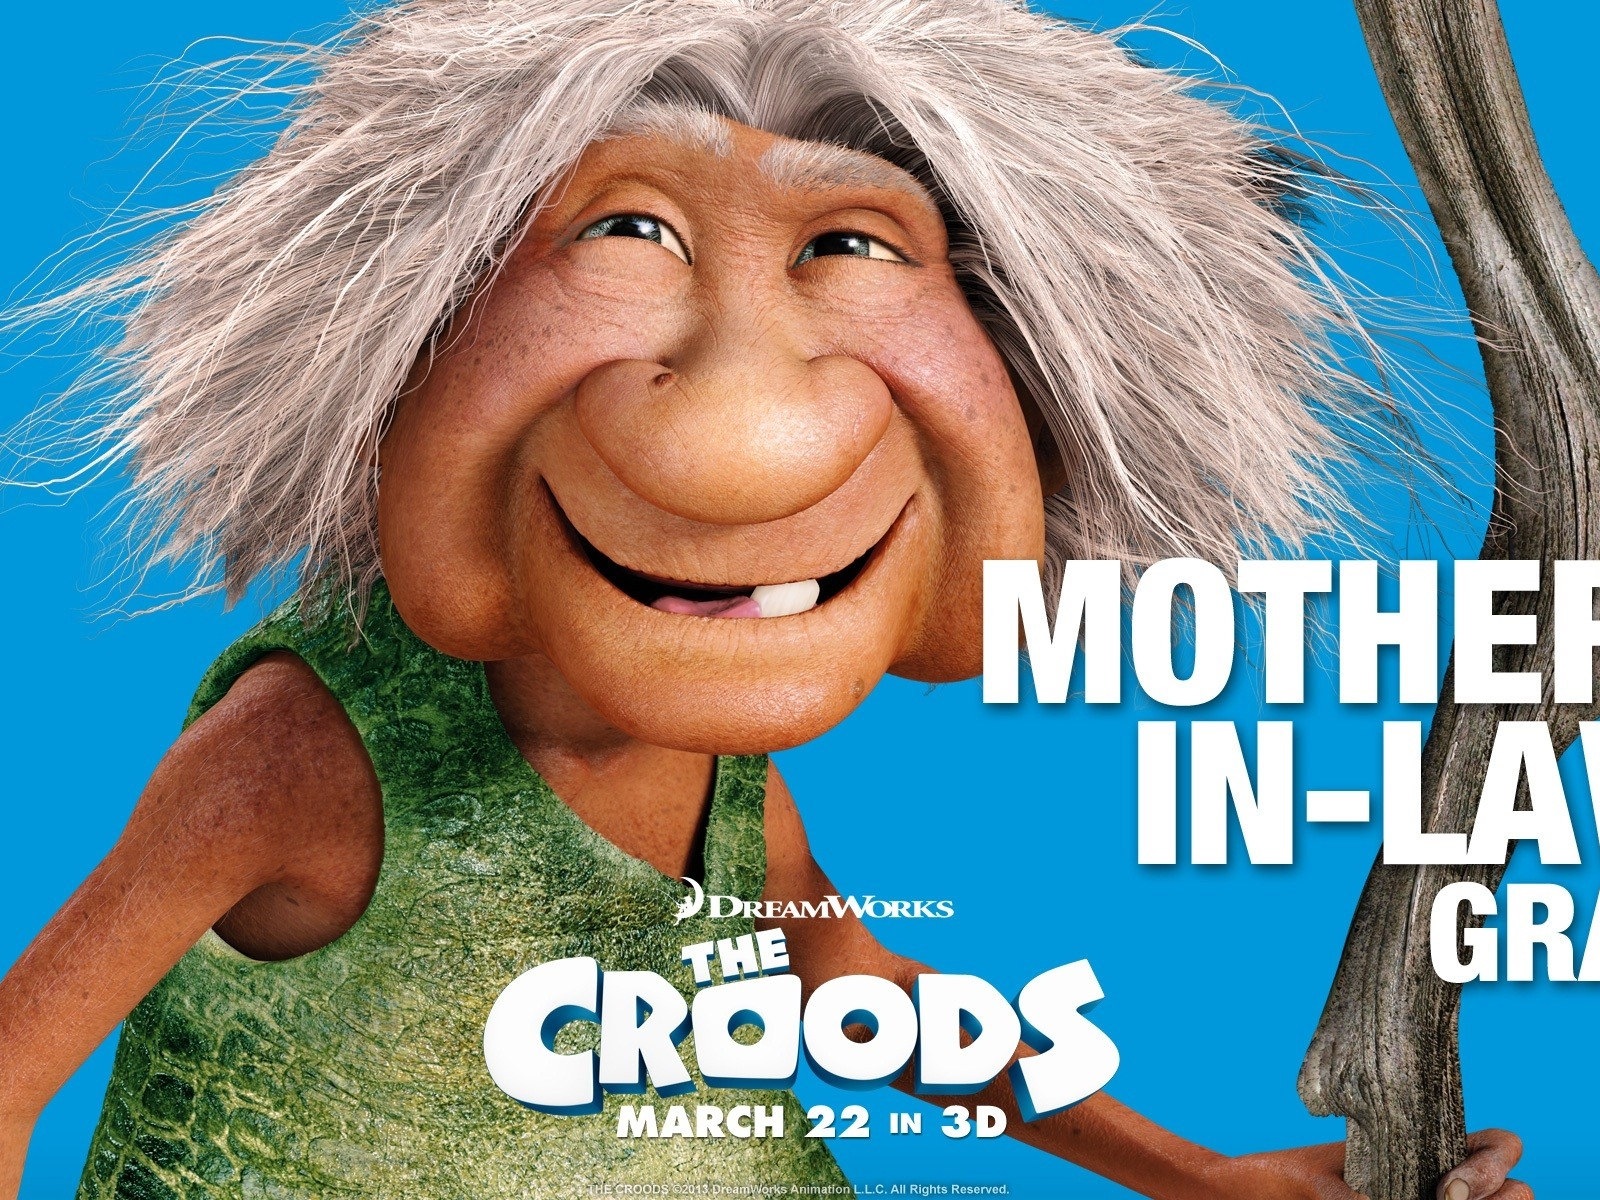 The Croods HD movie wallpapers #6 - 1600x1200